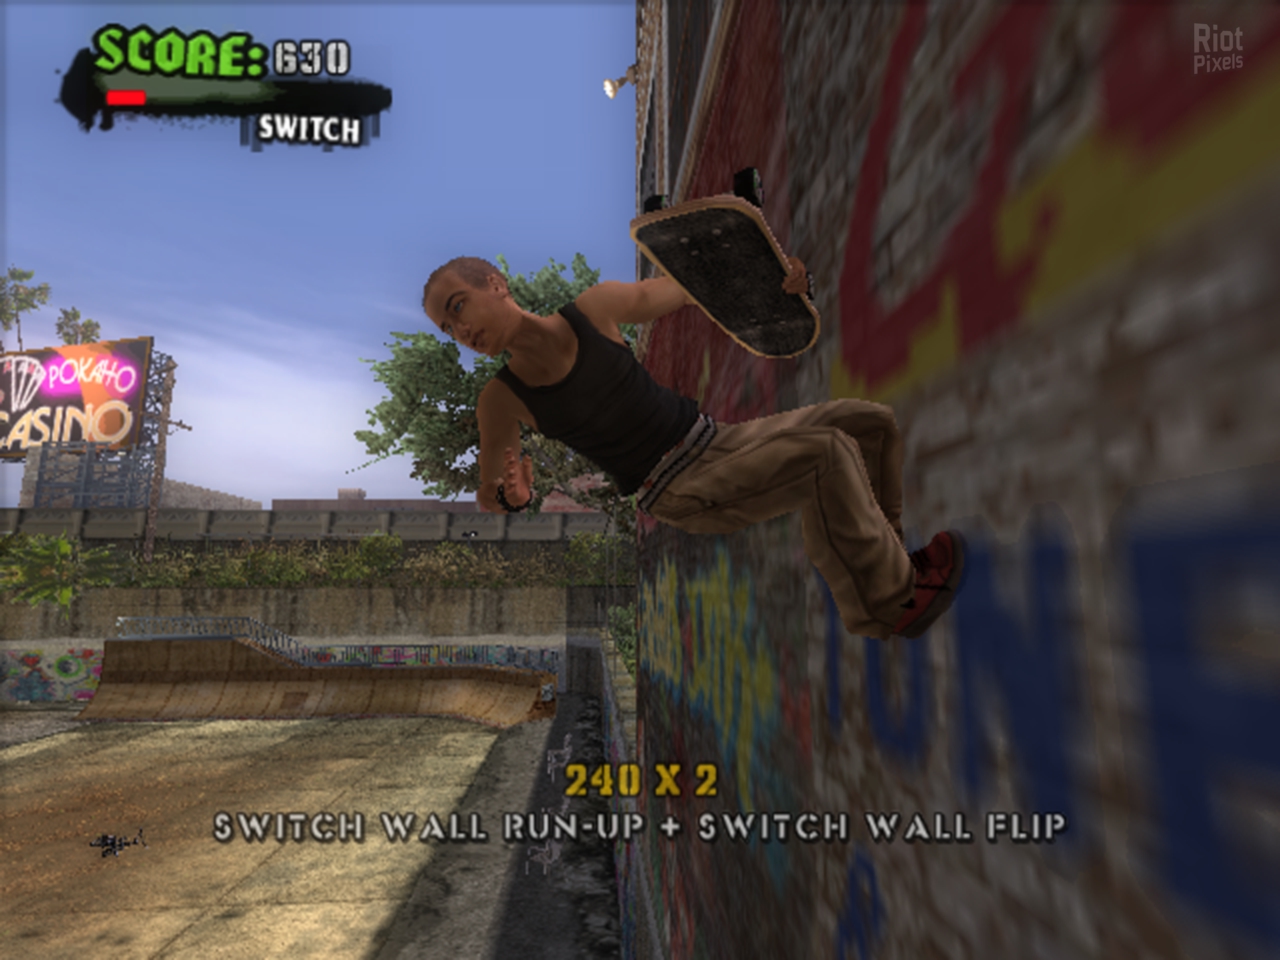 Tony Hawk's American Wasteland screenshots, images and pictures